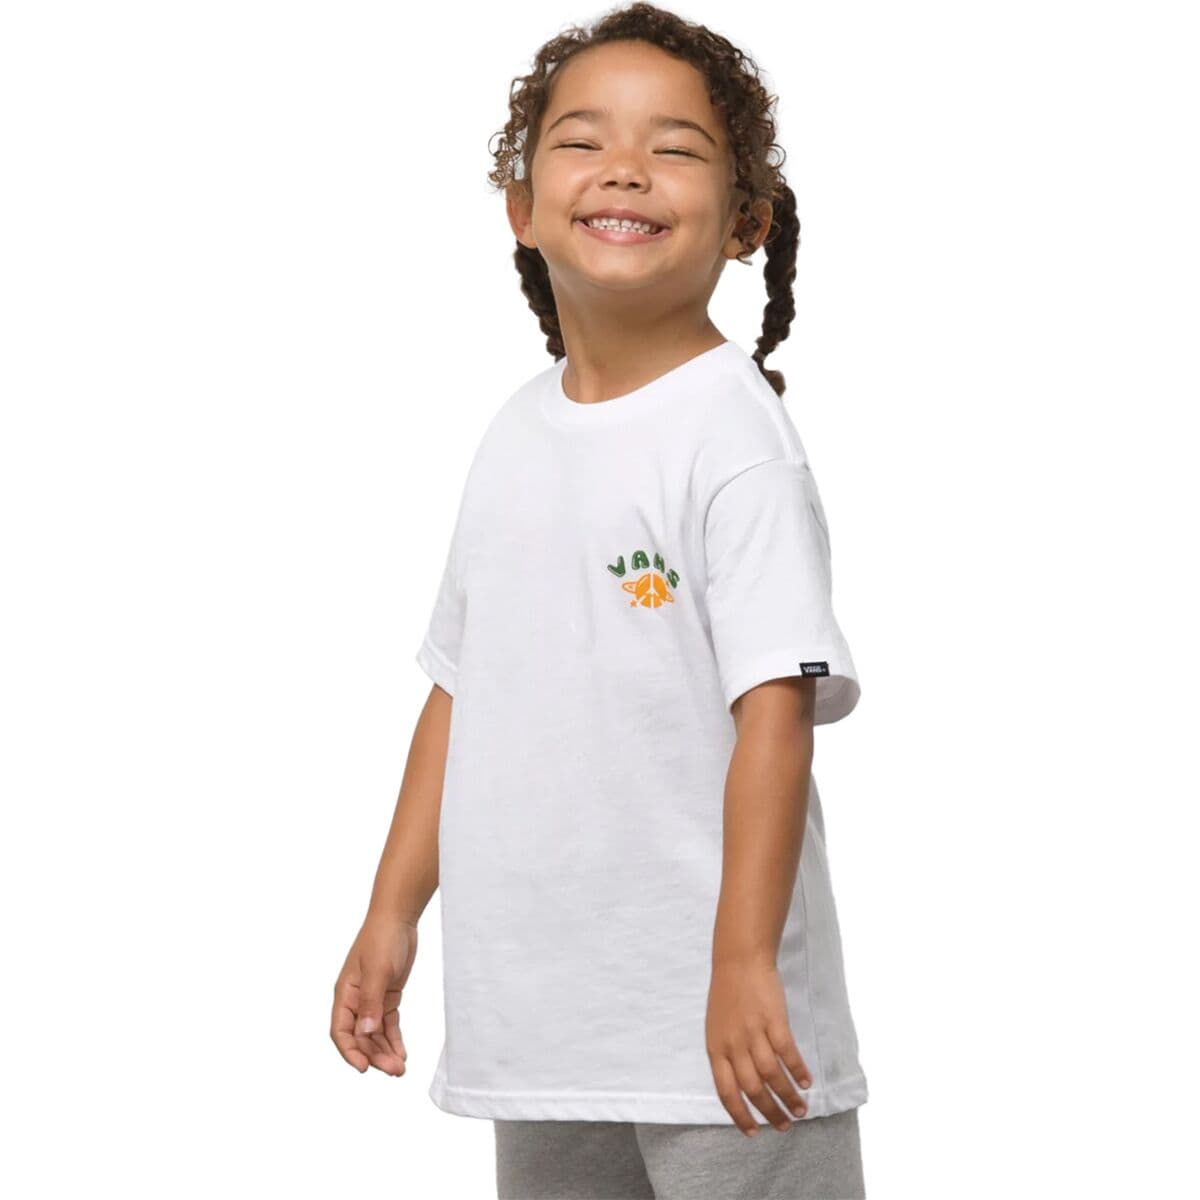 Vans Down To Earth Short-Sleeve Graphic T-Shirt - Toddlers'